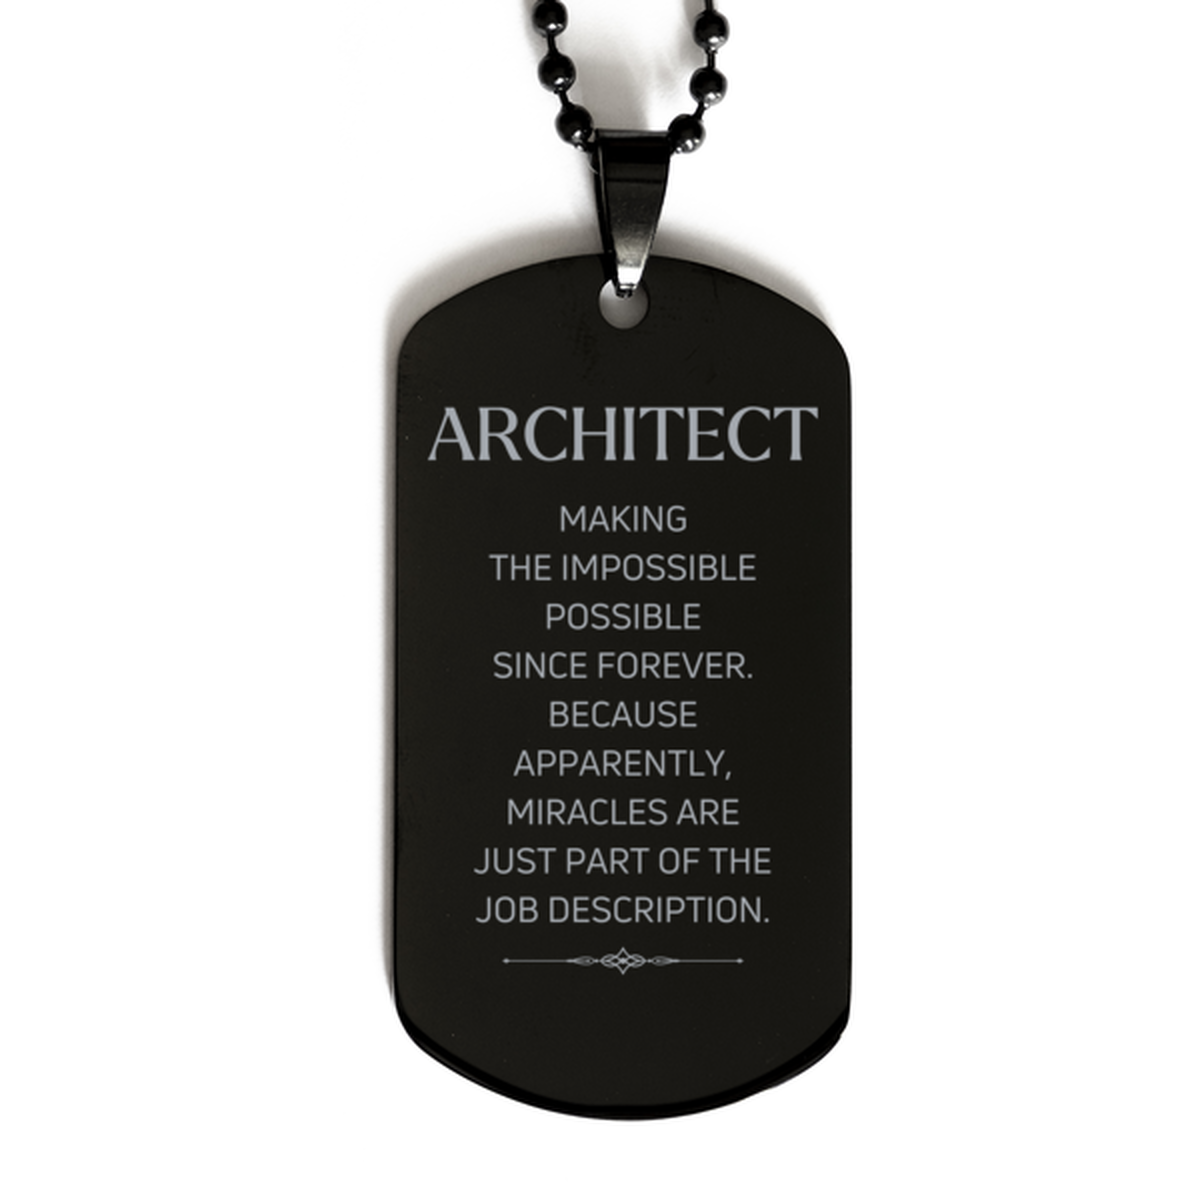 Funny Architect Gifts, Miracles are just part of the job description, Inspirational Birthday Black Dog Tag For Architect, Men, Women, Coworkers, Friends, Boss